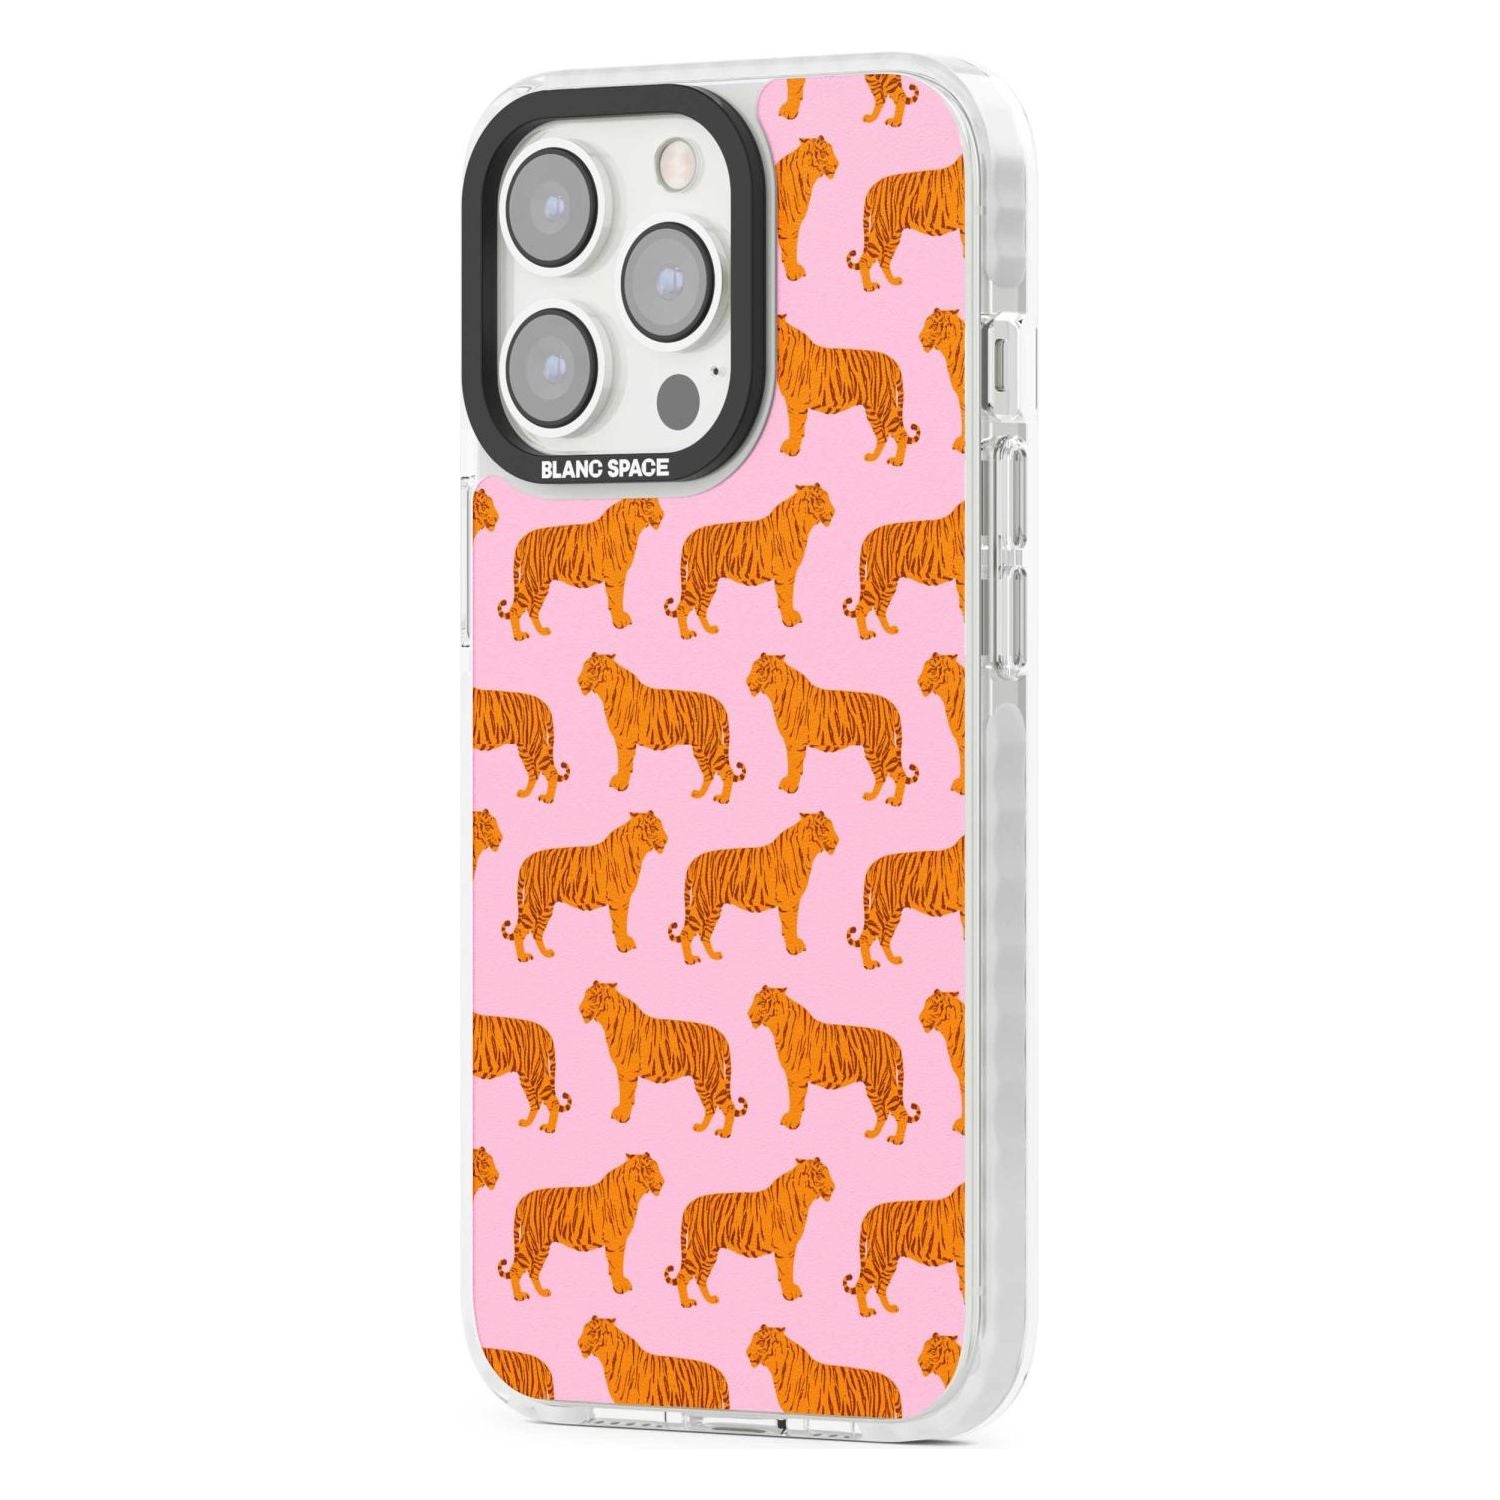 Tigers on Pink Pattern